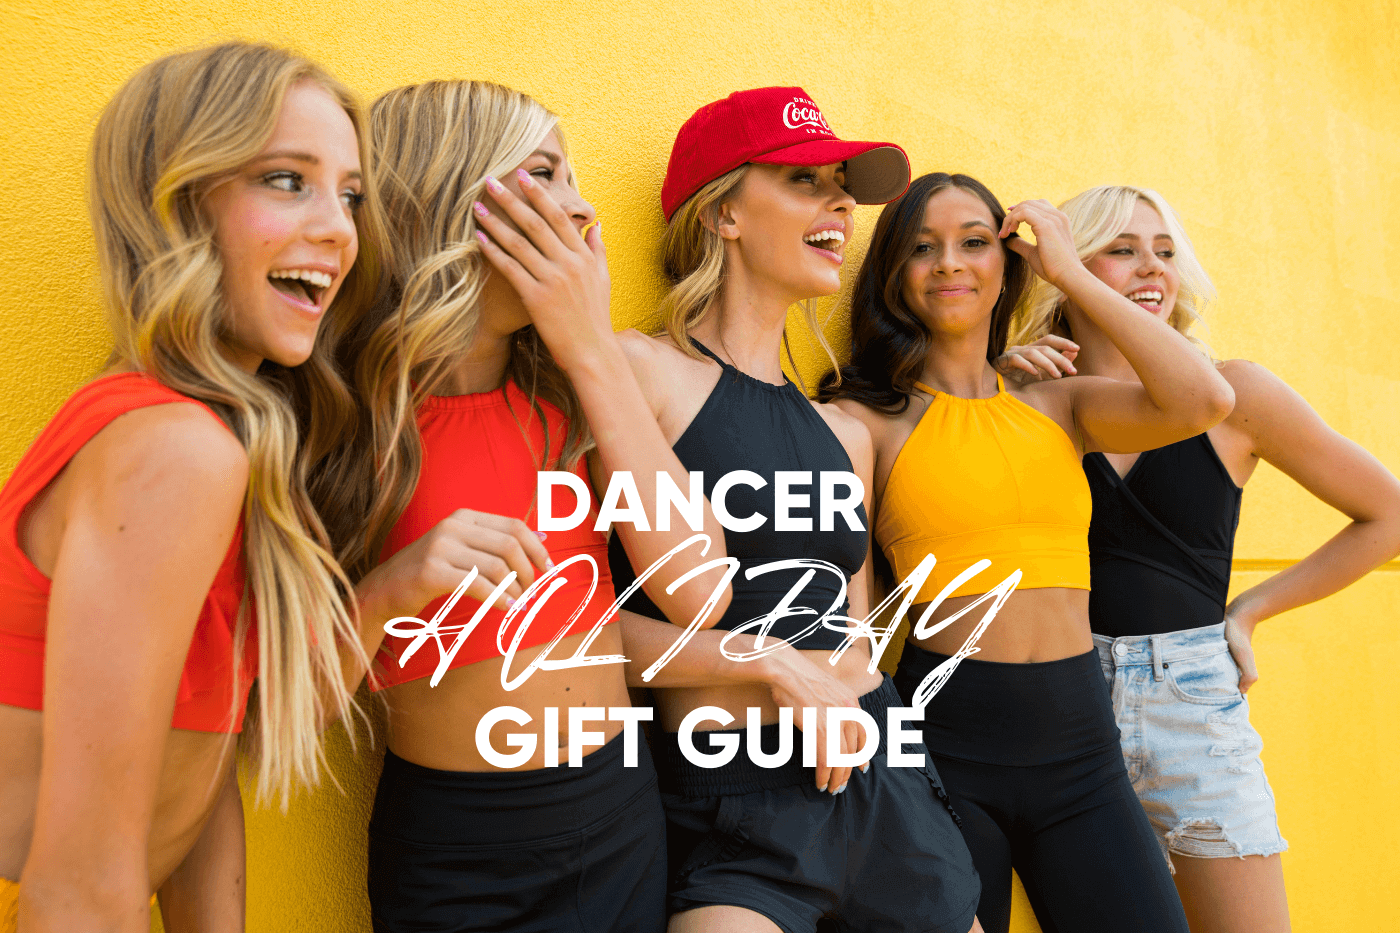 Dancer Gift Guide for the Holidays